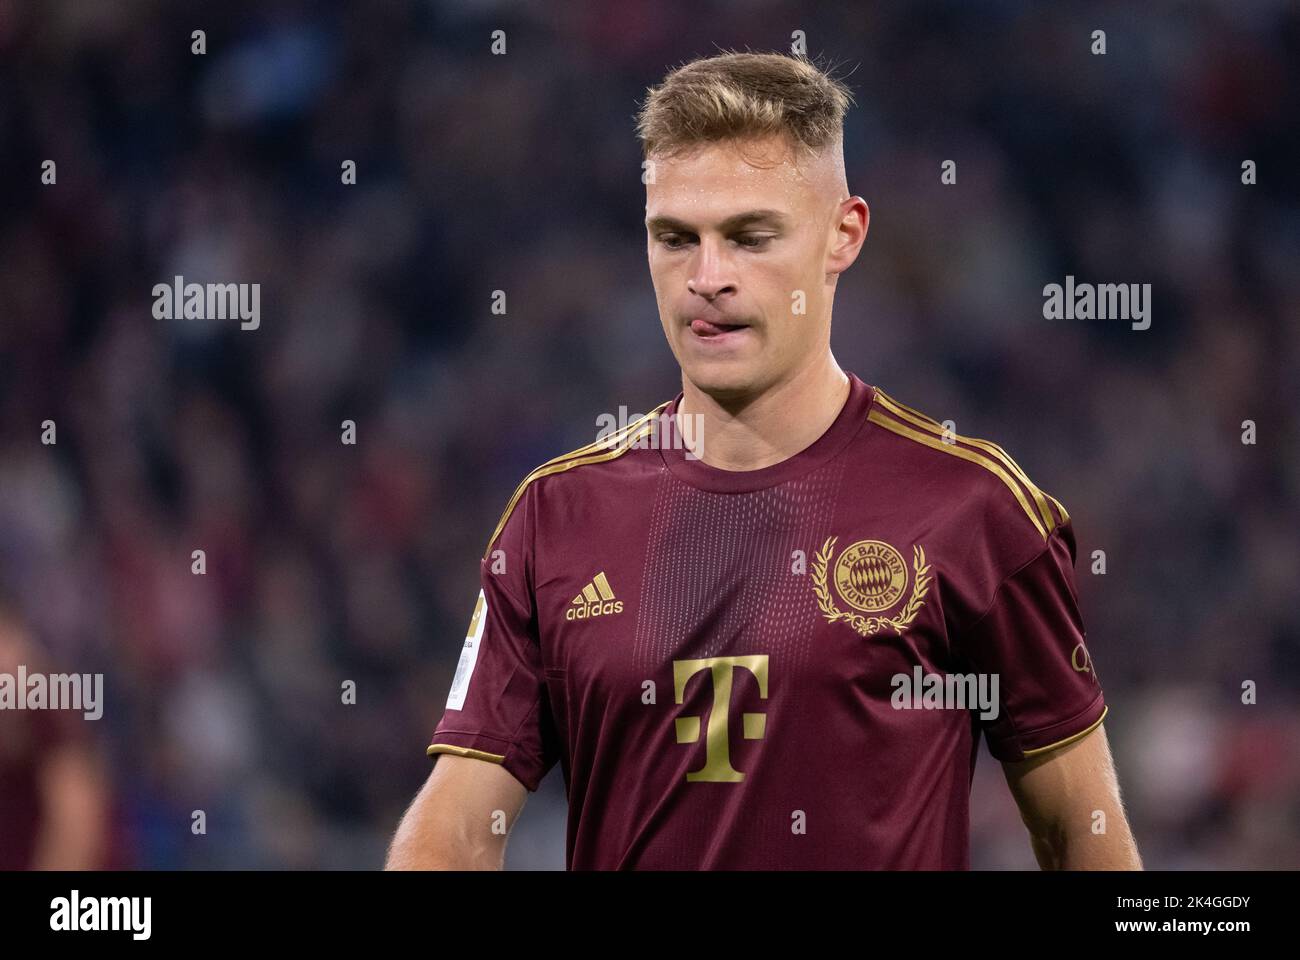 Munich, Germany. 30th Sep, 2022. Soccer: Bundesliga, Bayern Munich - Bayer Leverkusen, Matchday 8 at Allianz Arena. Joshua Kimmich of Munich is on the pitch. Credit: Sven Hoppe/dpa - IMPORTANT NOTE: In accordance with the requirements of the DFL Deutsche Fußball Liga and the DFB Deutscher Fußball-Bund, it is prohibited to use or have used photographs taken in the stadium and/or of the match in the form of sequence pictures and/or video-like photo series./dpa/Alamy Live News Stock Photo